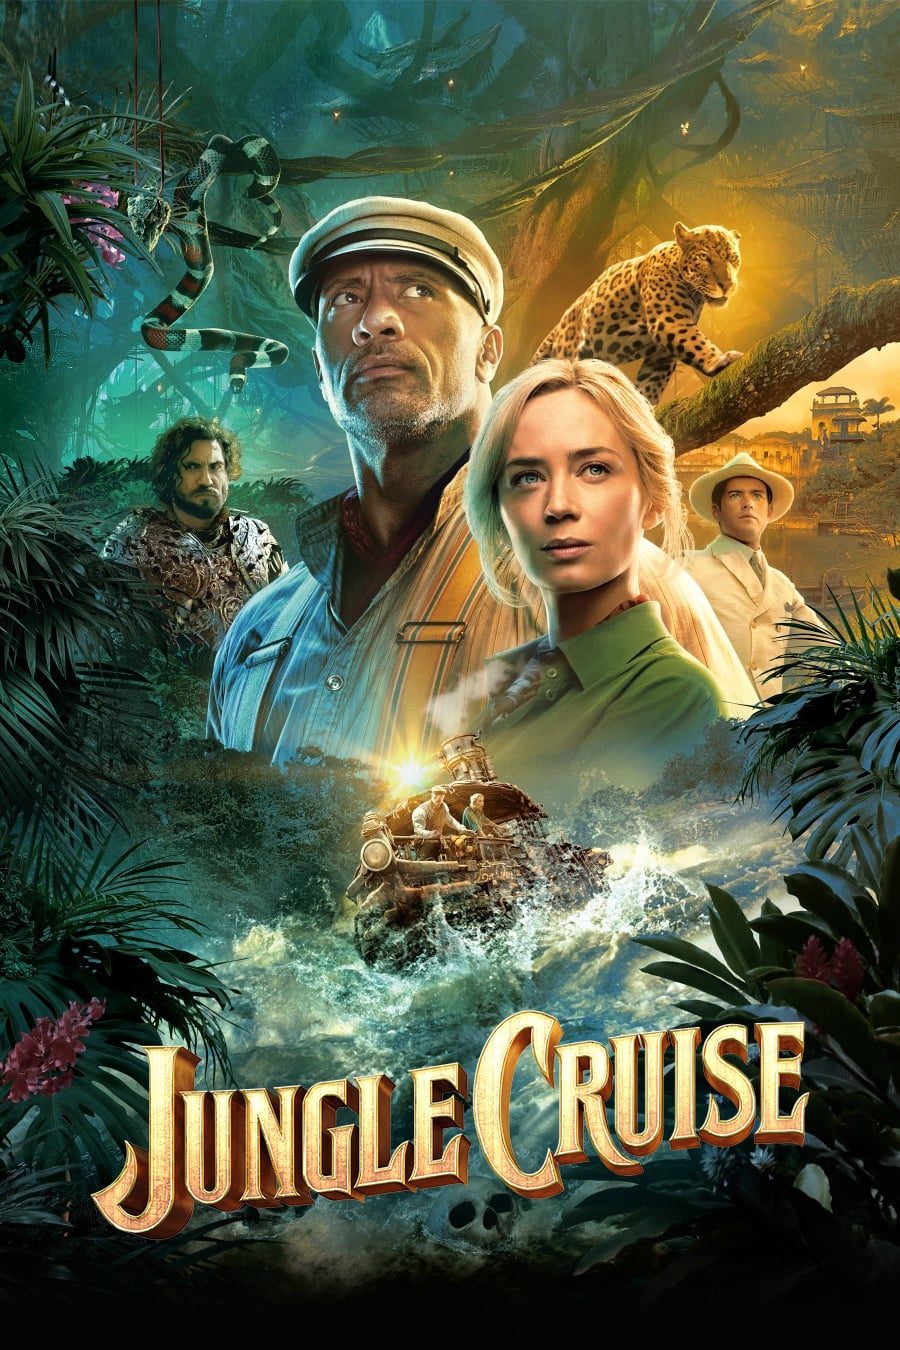 Poster for the movie "Jungle Cruise"